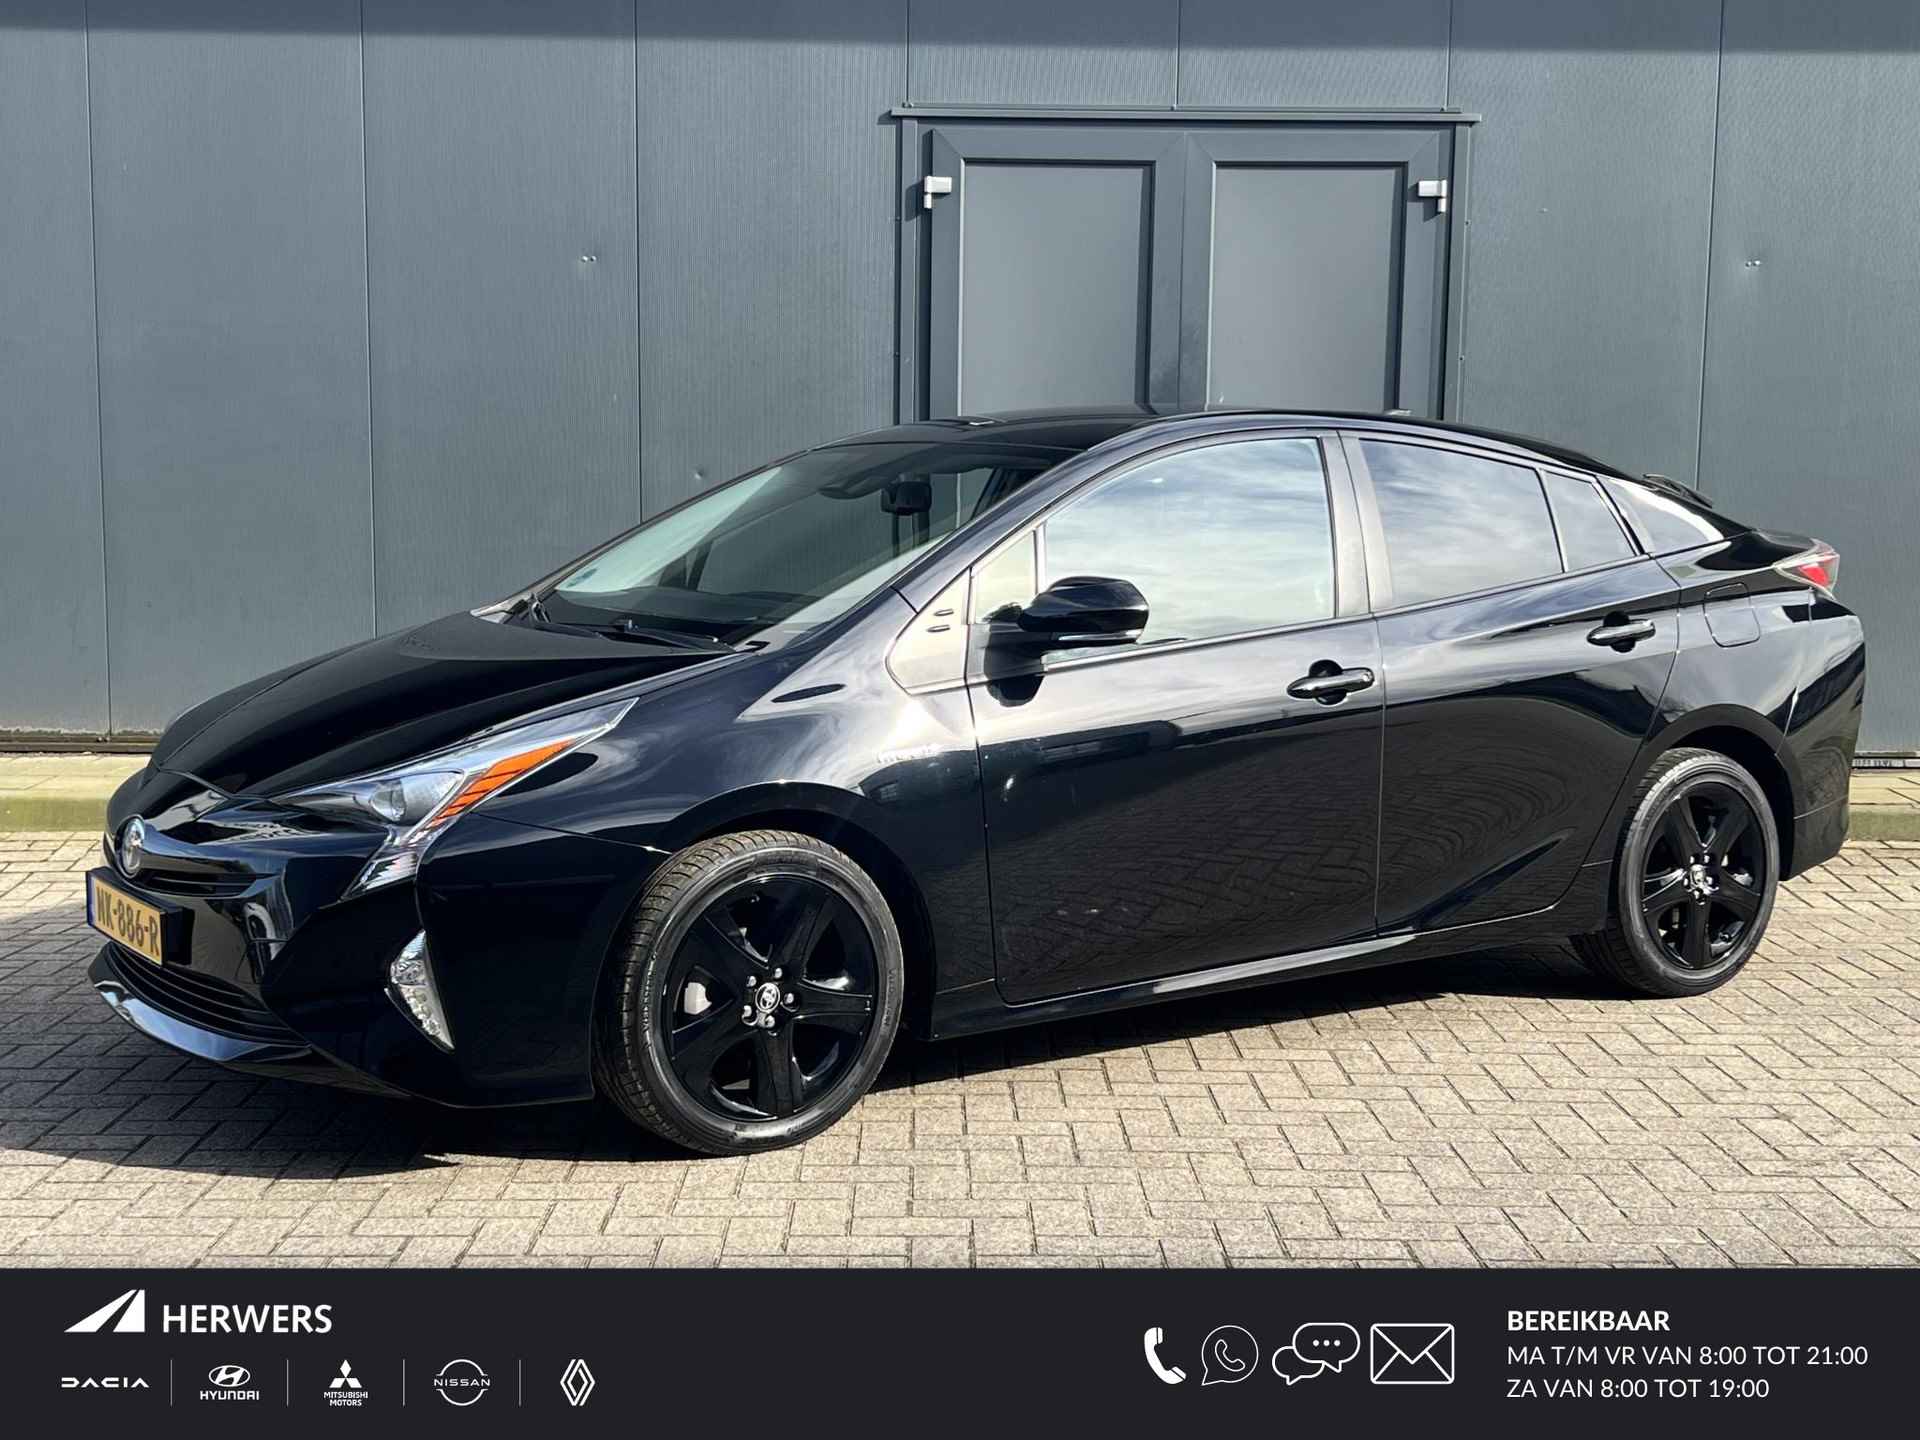 Toyota Prius 1.8 First Edition Automaat / Navigatie / Cruise Control / Climate Control / Stoelverwarming / DAB / Bluetooth / Head-Up Display / Dodehoek Herkenning / Camera - 1/30